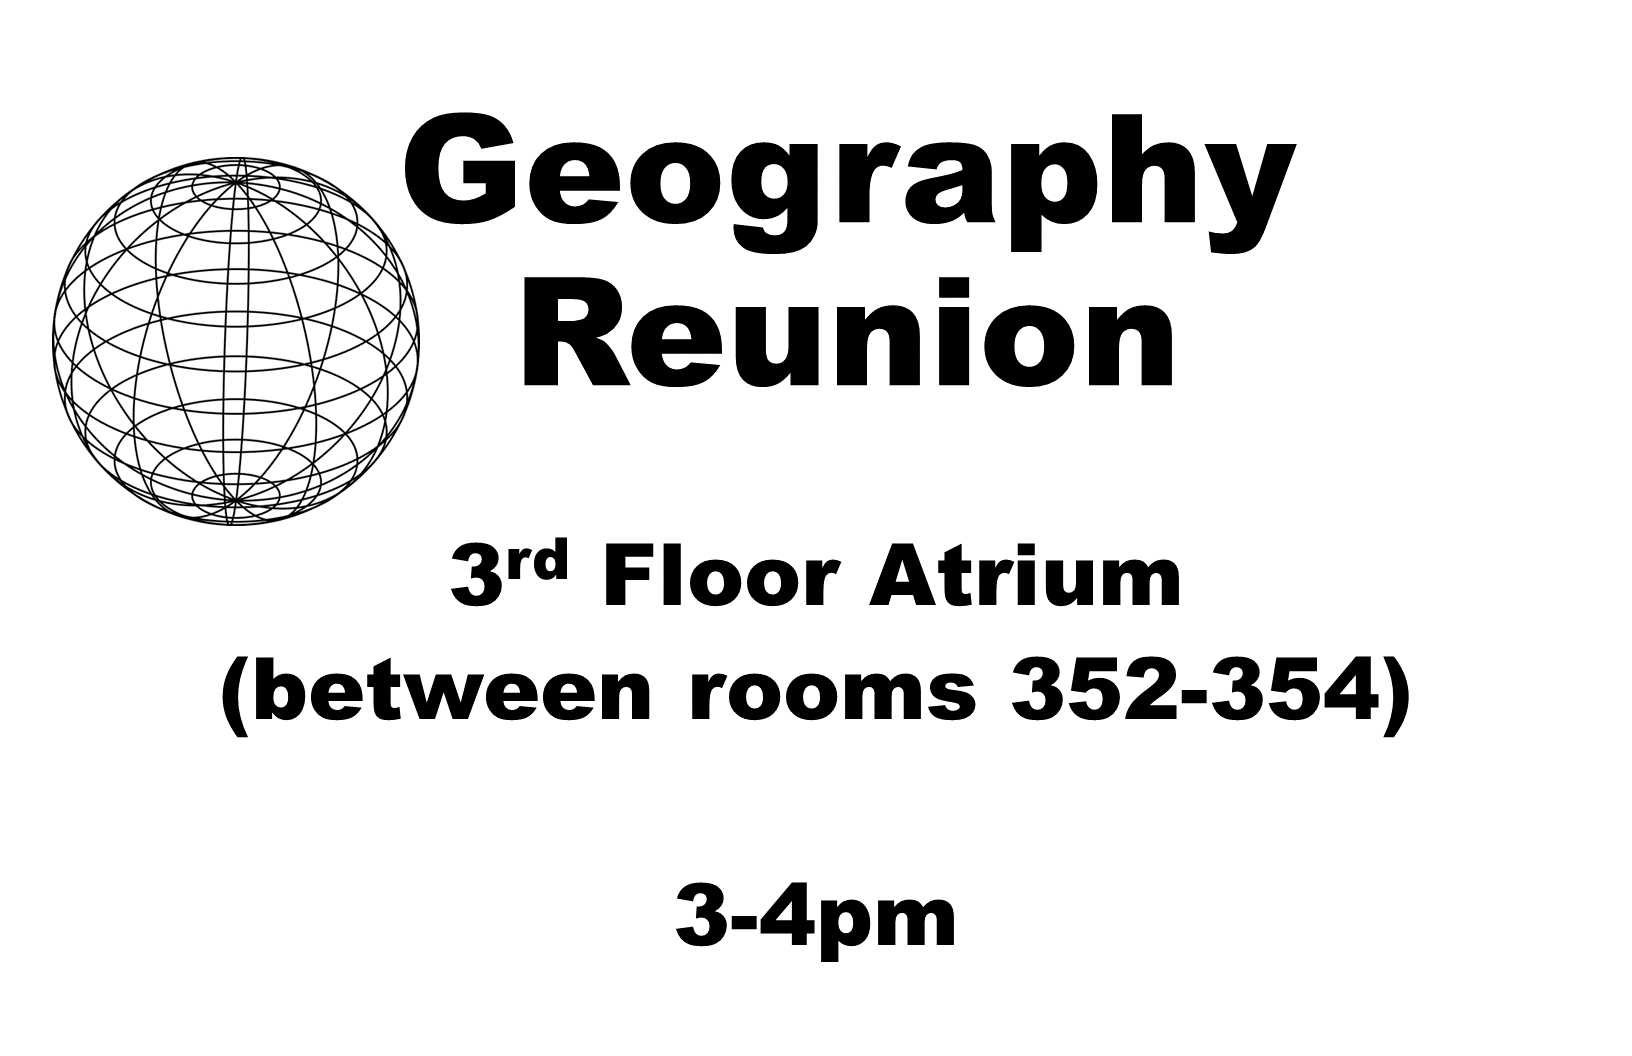 Poster for the Geography 2023 Reunion event, located on 3rd Floor Atrium (between rooms 352-354), 3-4pm